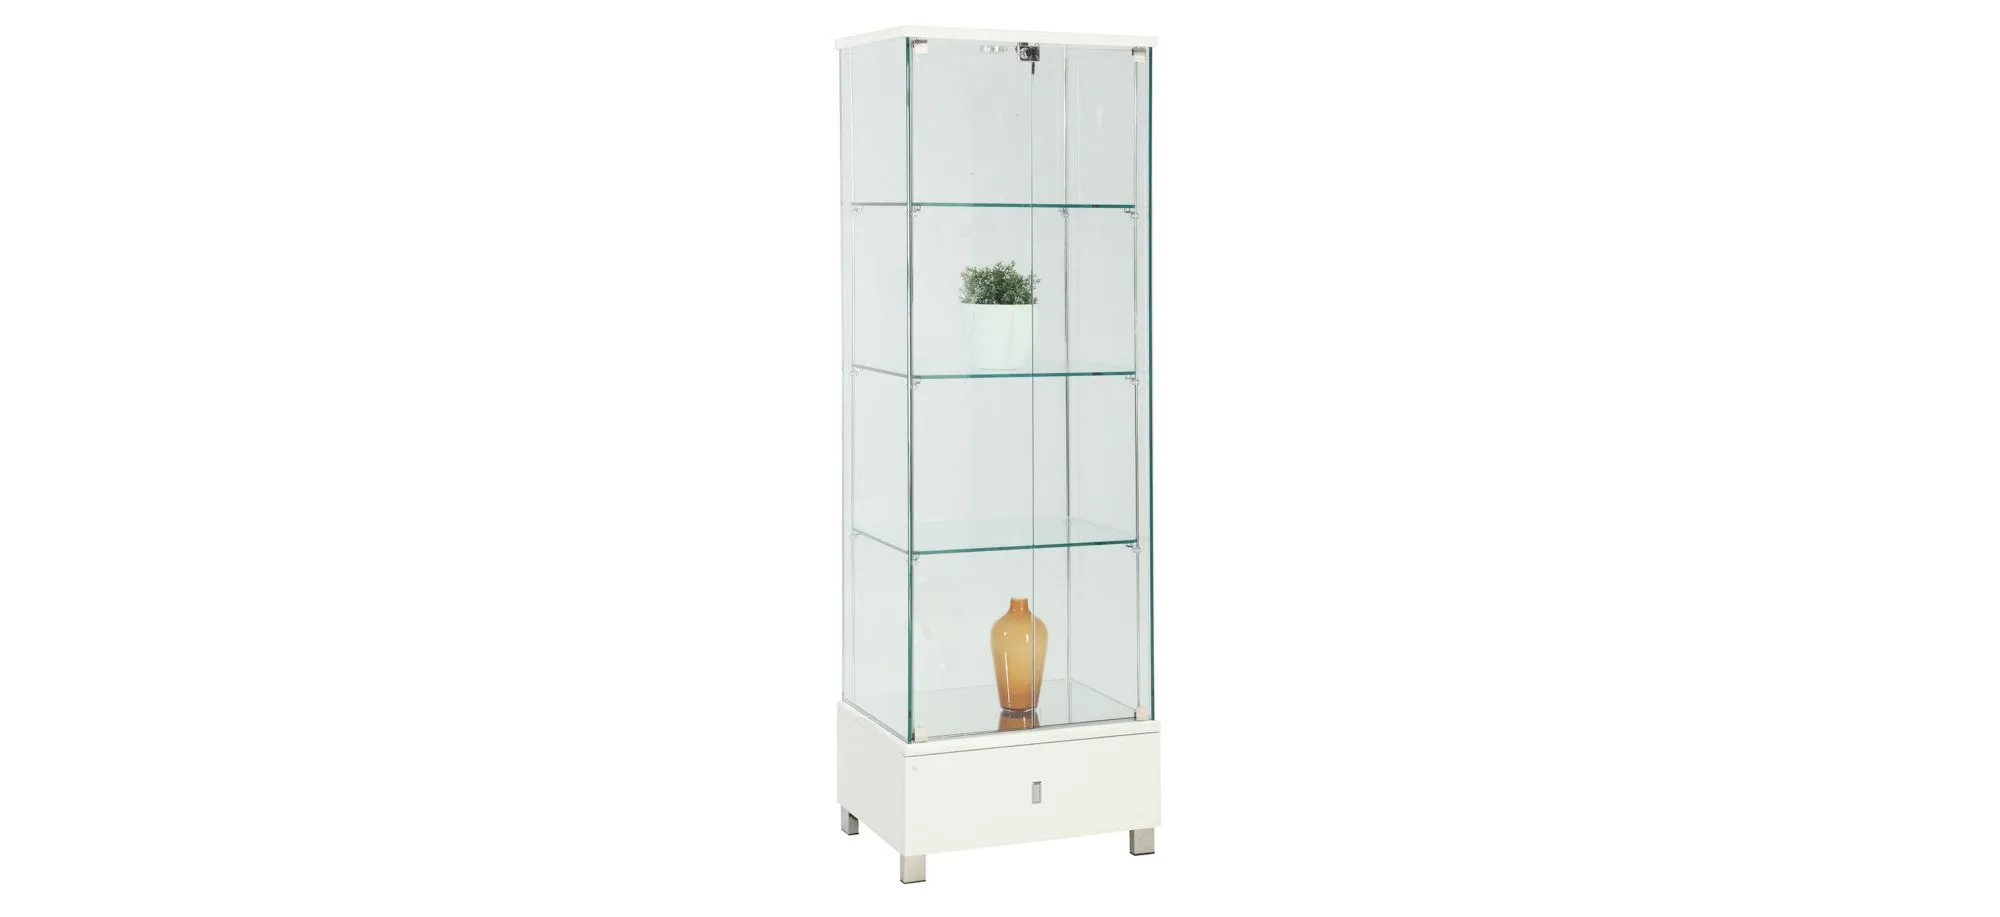 Cibolo Glass Curio w/ LED Lights in White by Chintaly Imports